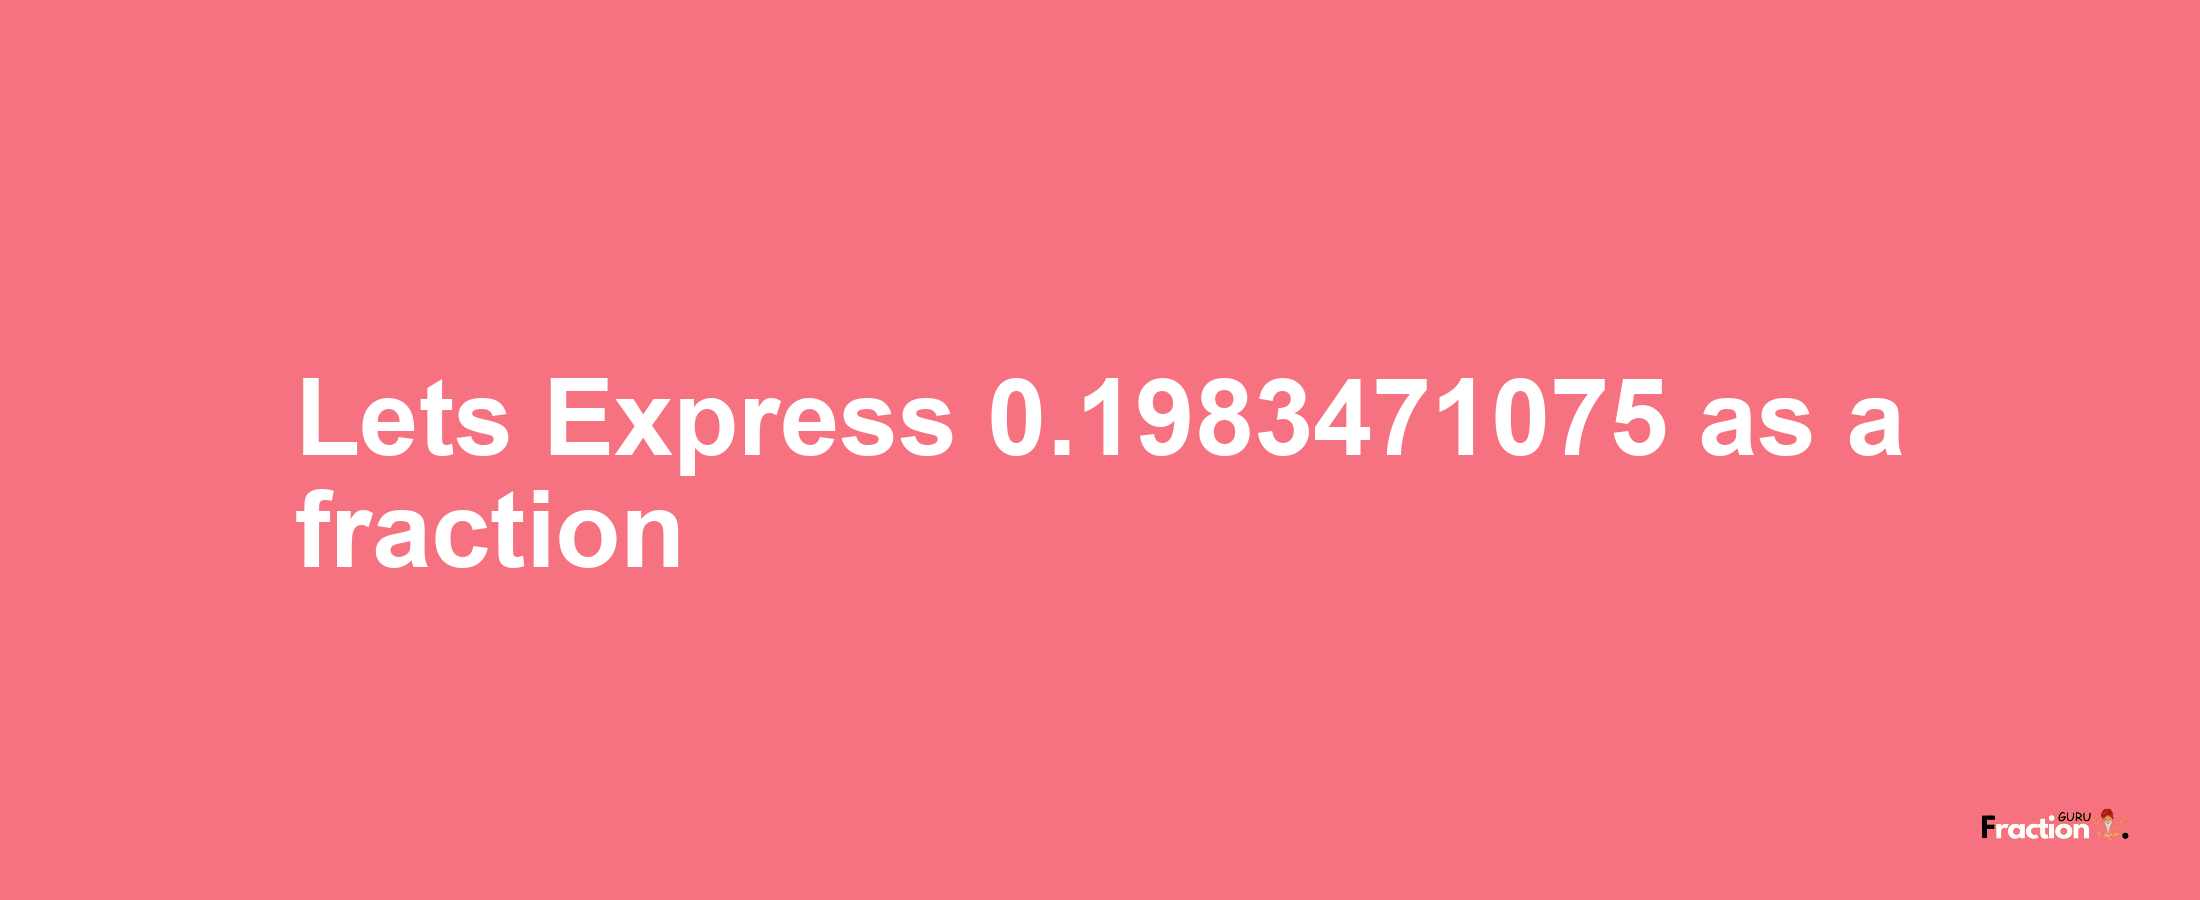 Lets Express 0.1983471075 as afraction